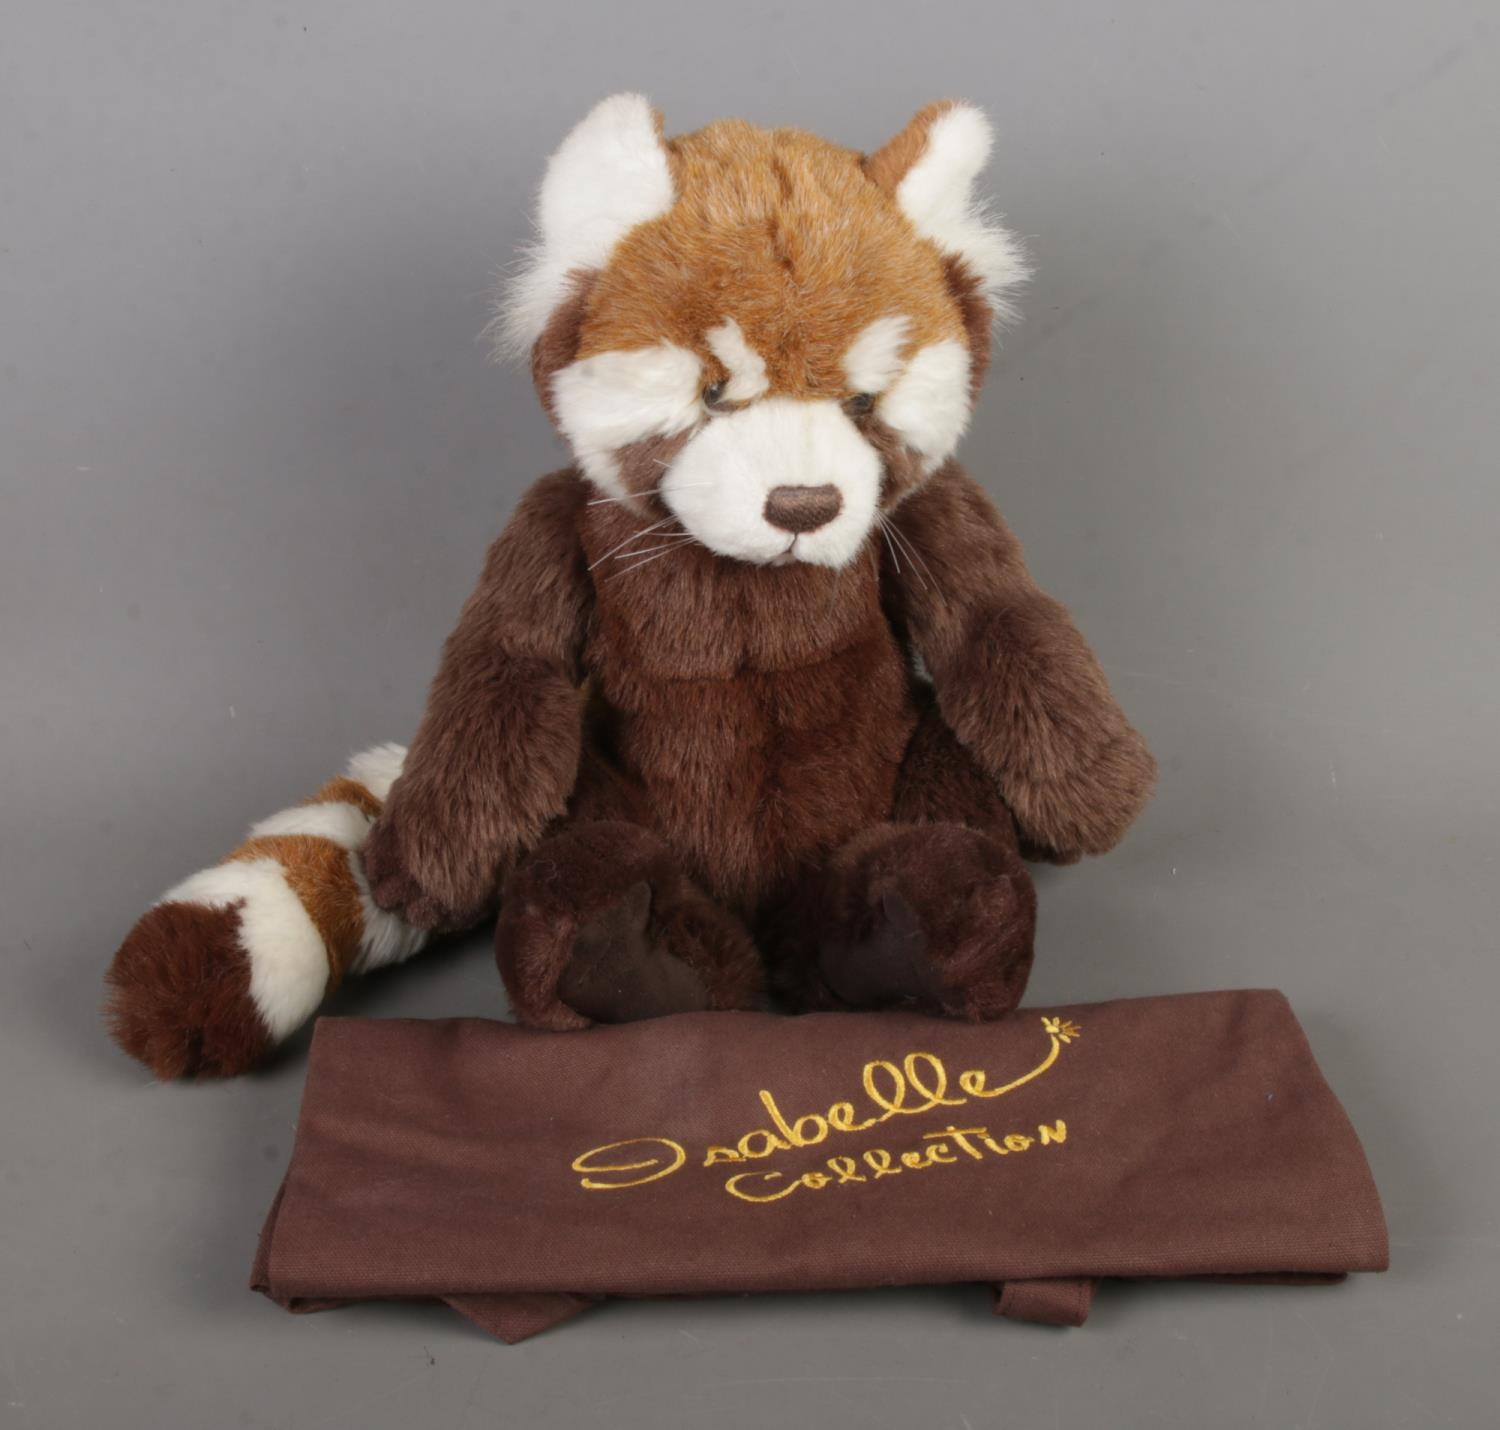 A Charlie Bears jointed teddy bear in the form of a Red Panda named Ronnie (CB083855), designed by